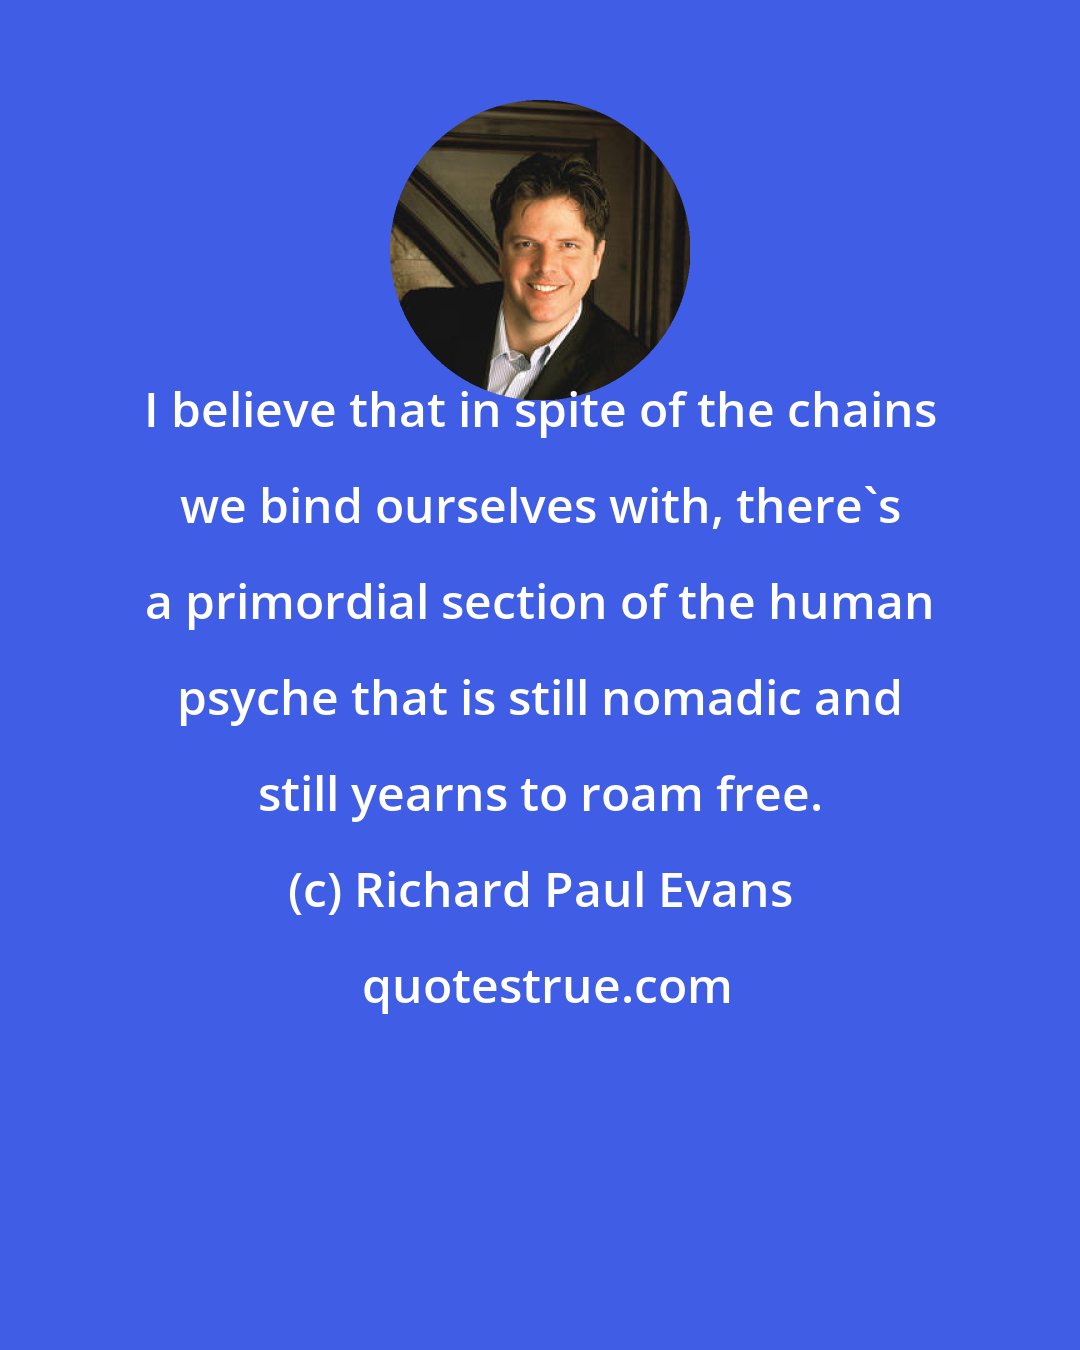 Richard Paul Evans: I believe that in spite of the chains we bind ourselves with, there's a primordial section of the human psyche that is still nomadic and still yearns to roam free.